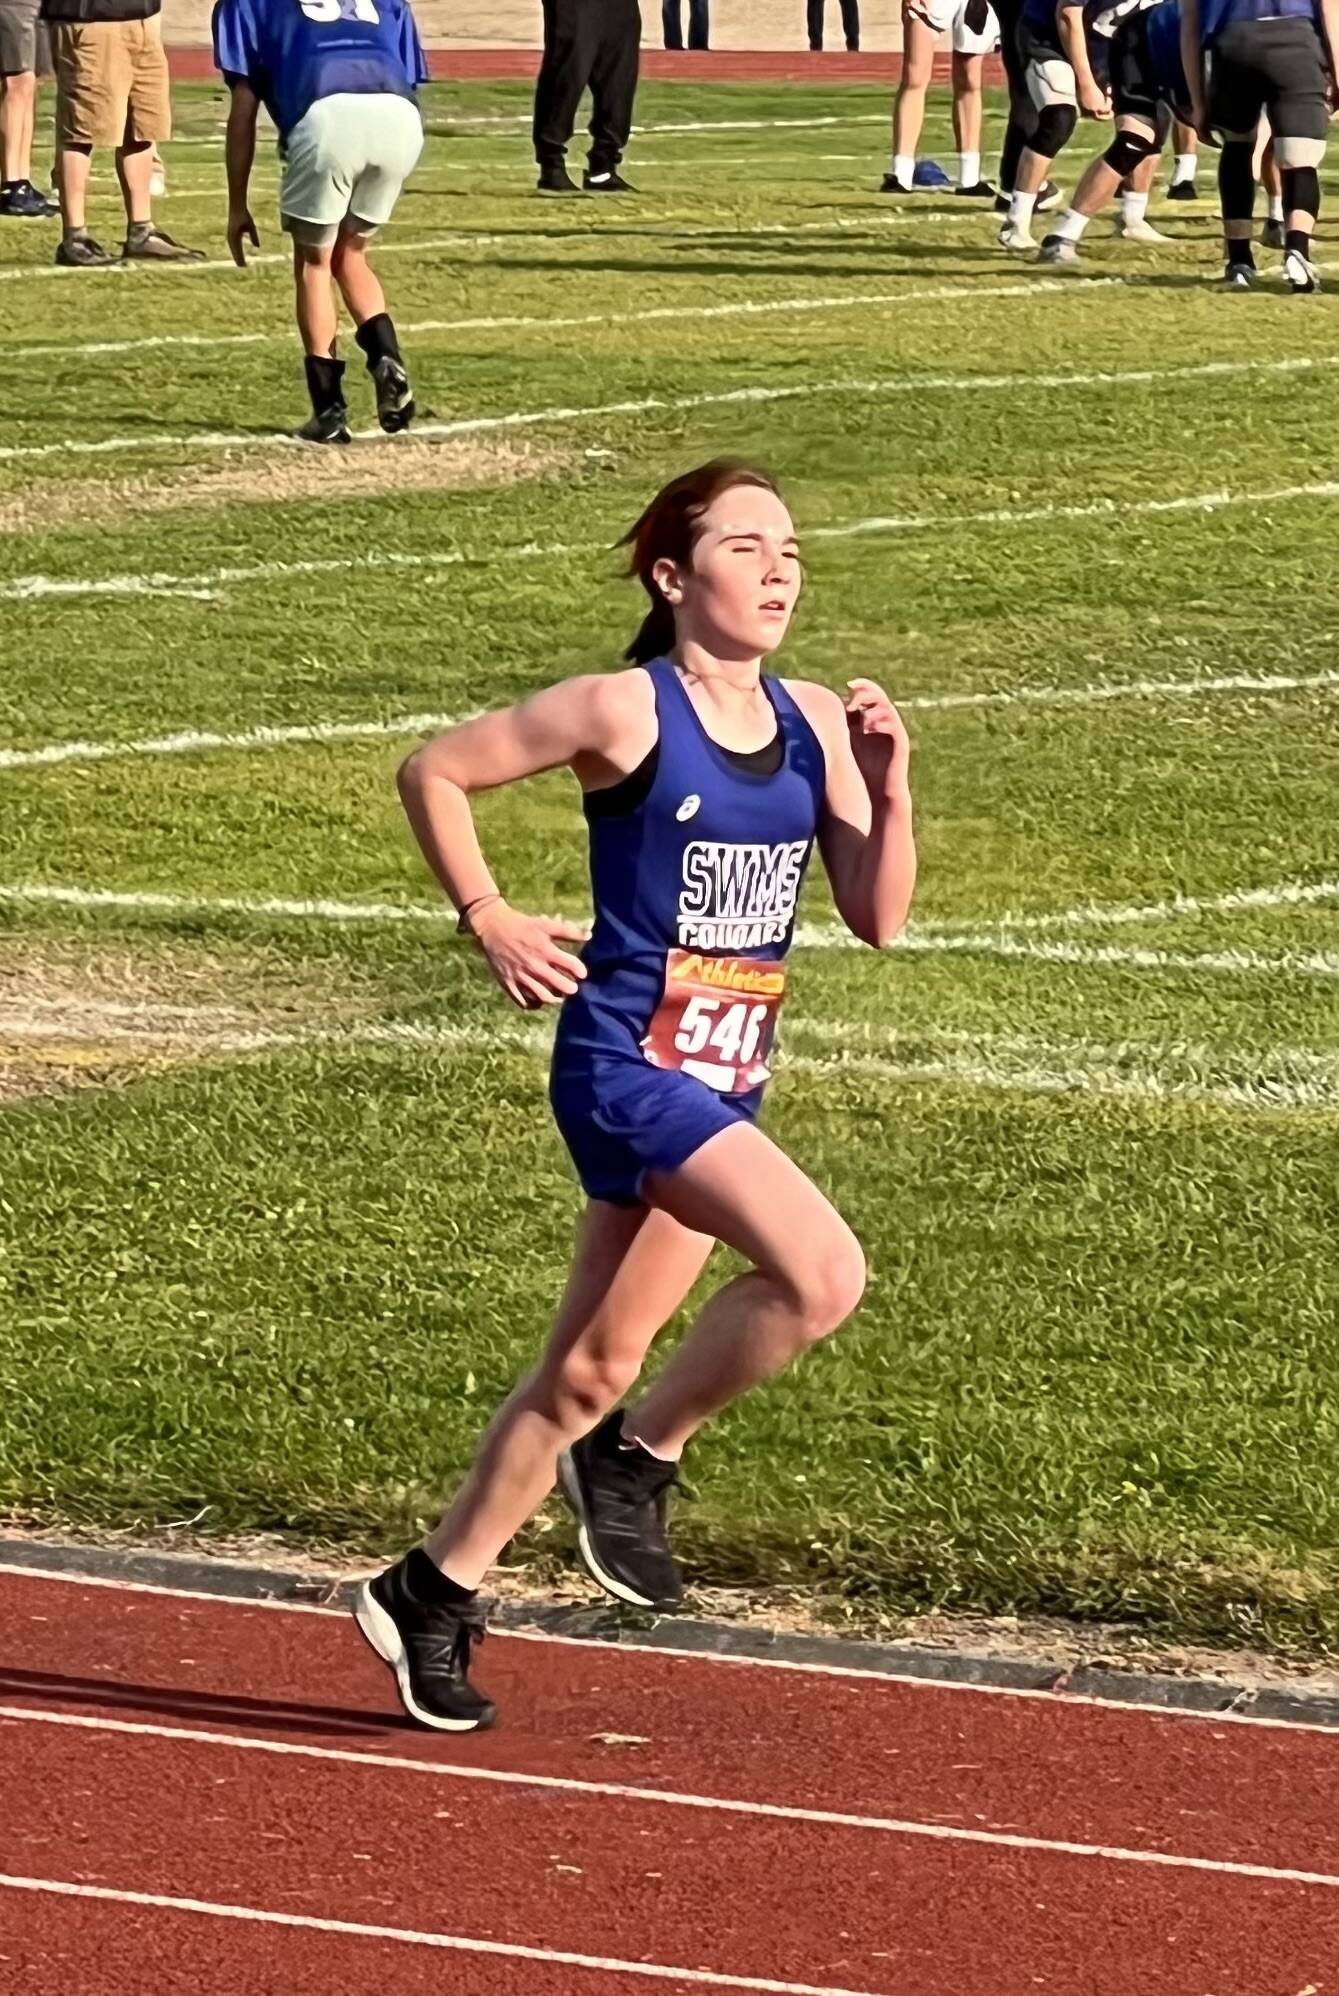 Photo provided
Reed Atwood placed 3rd at the Cascade League Championship held at South Whidbey High School with a time of 12 minutes, 2 seconds.